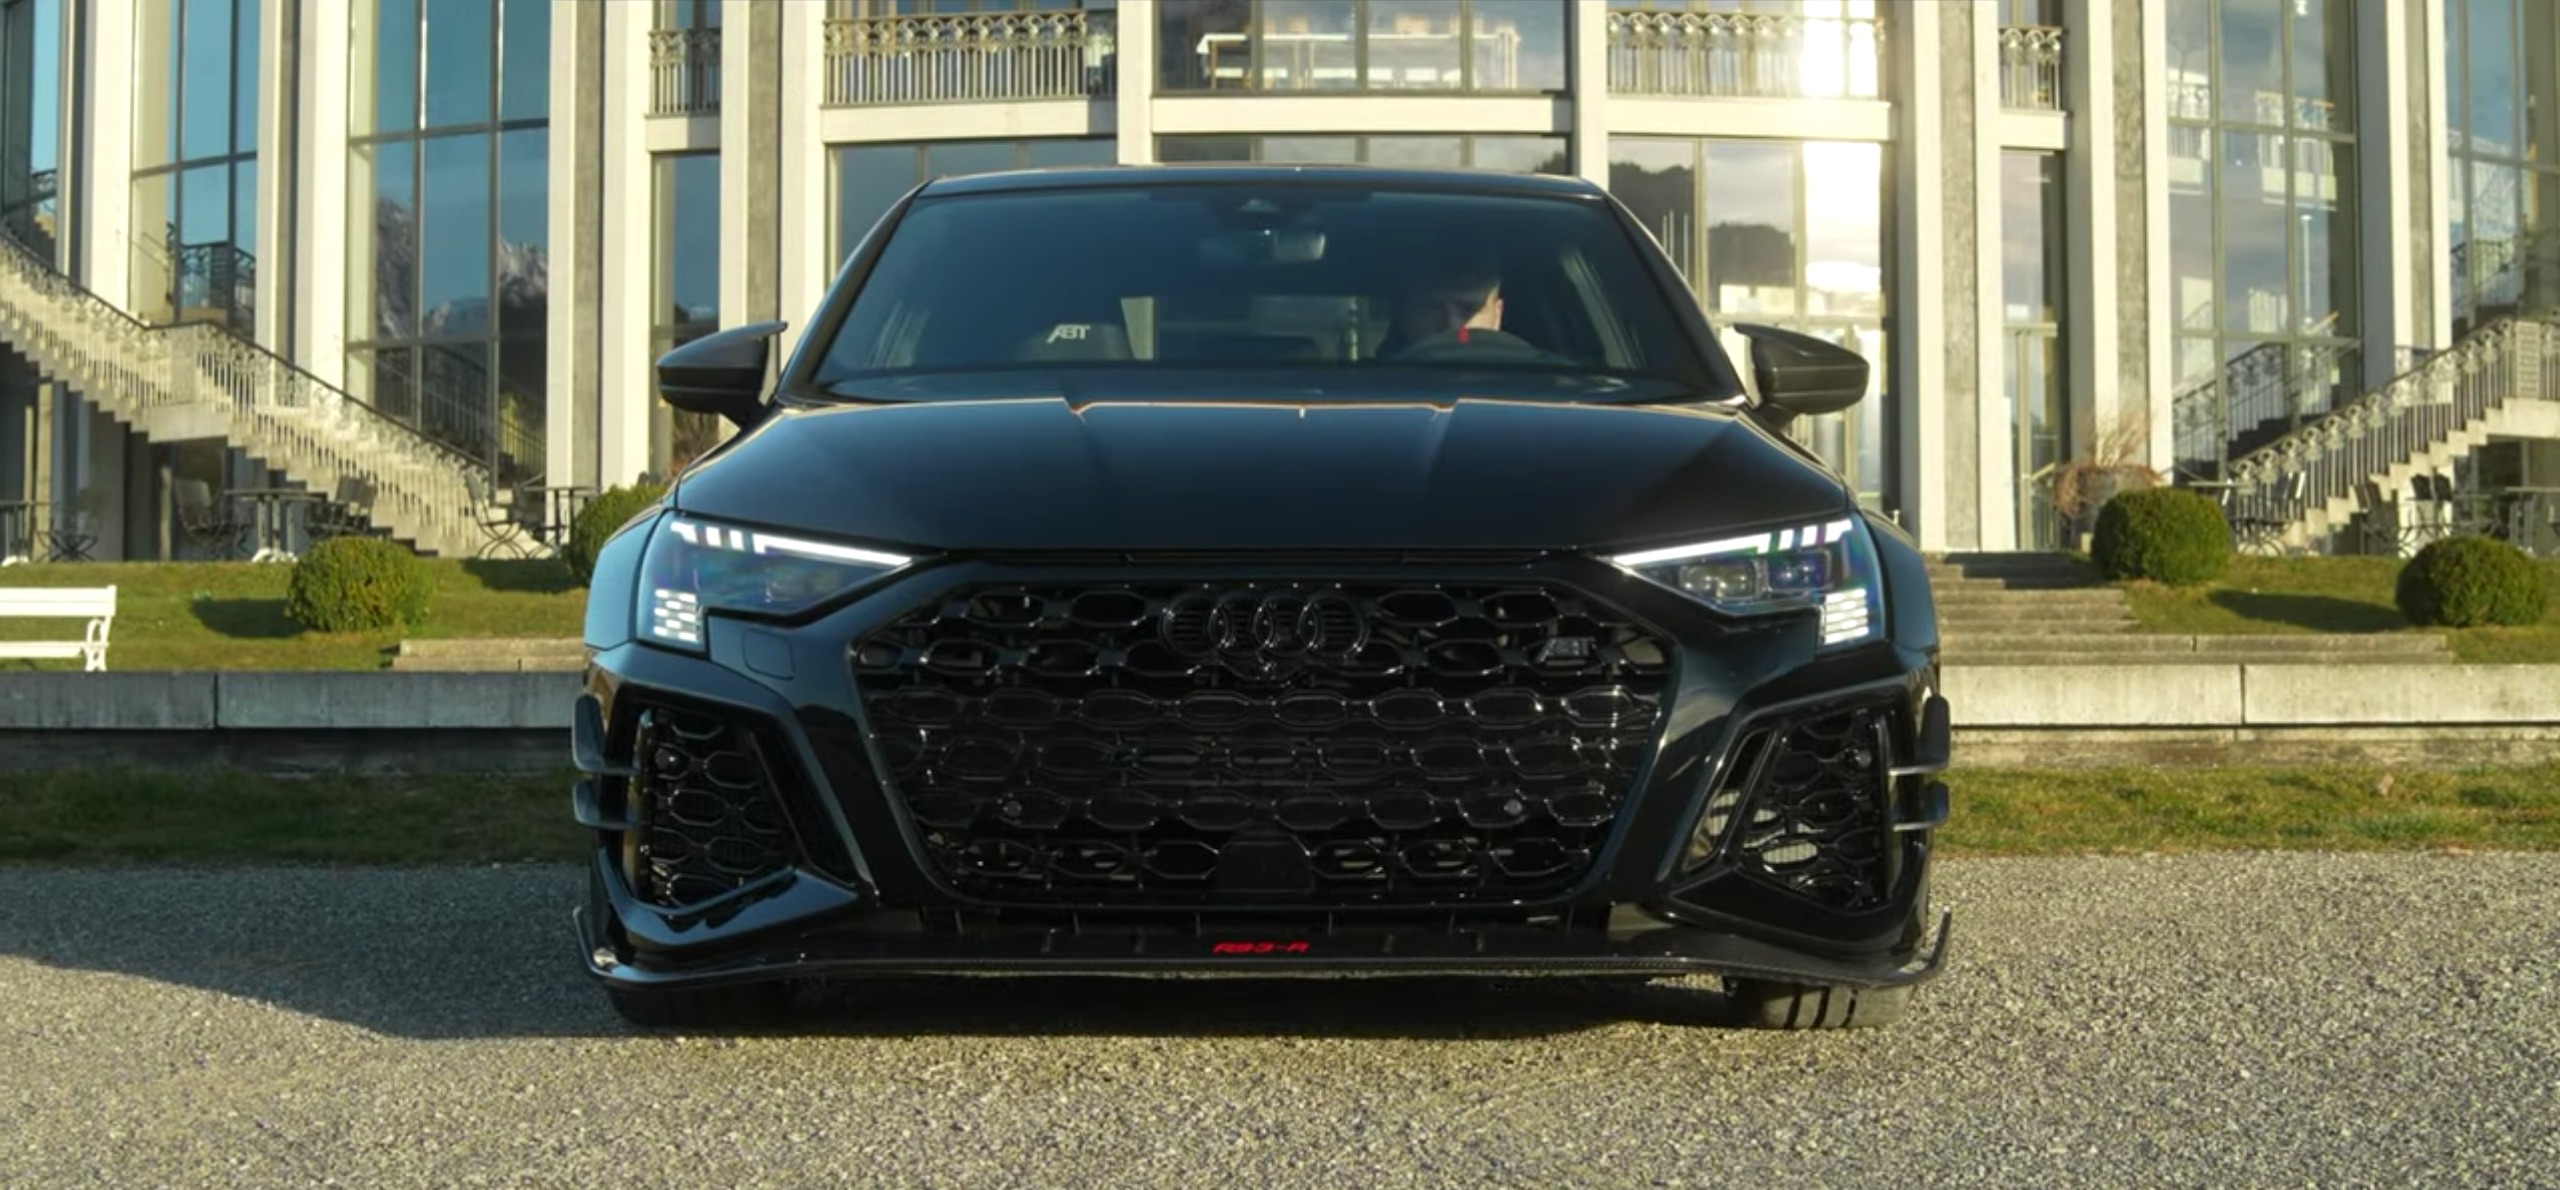 https://s1.cdn.autoevolution.com/images/news/nothing-friendly-about-this-darth-vader-looking-abt-2023-audi-rs3-r-in-its-ultimate-form-213005_1.jpeg